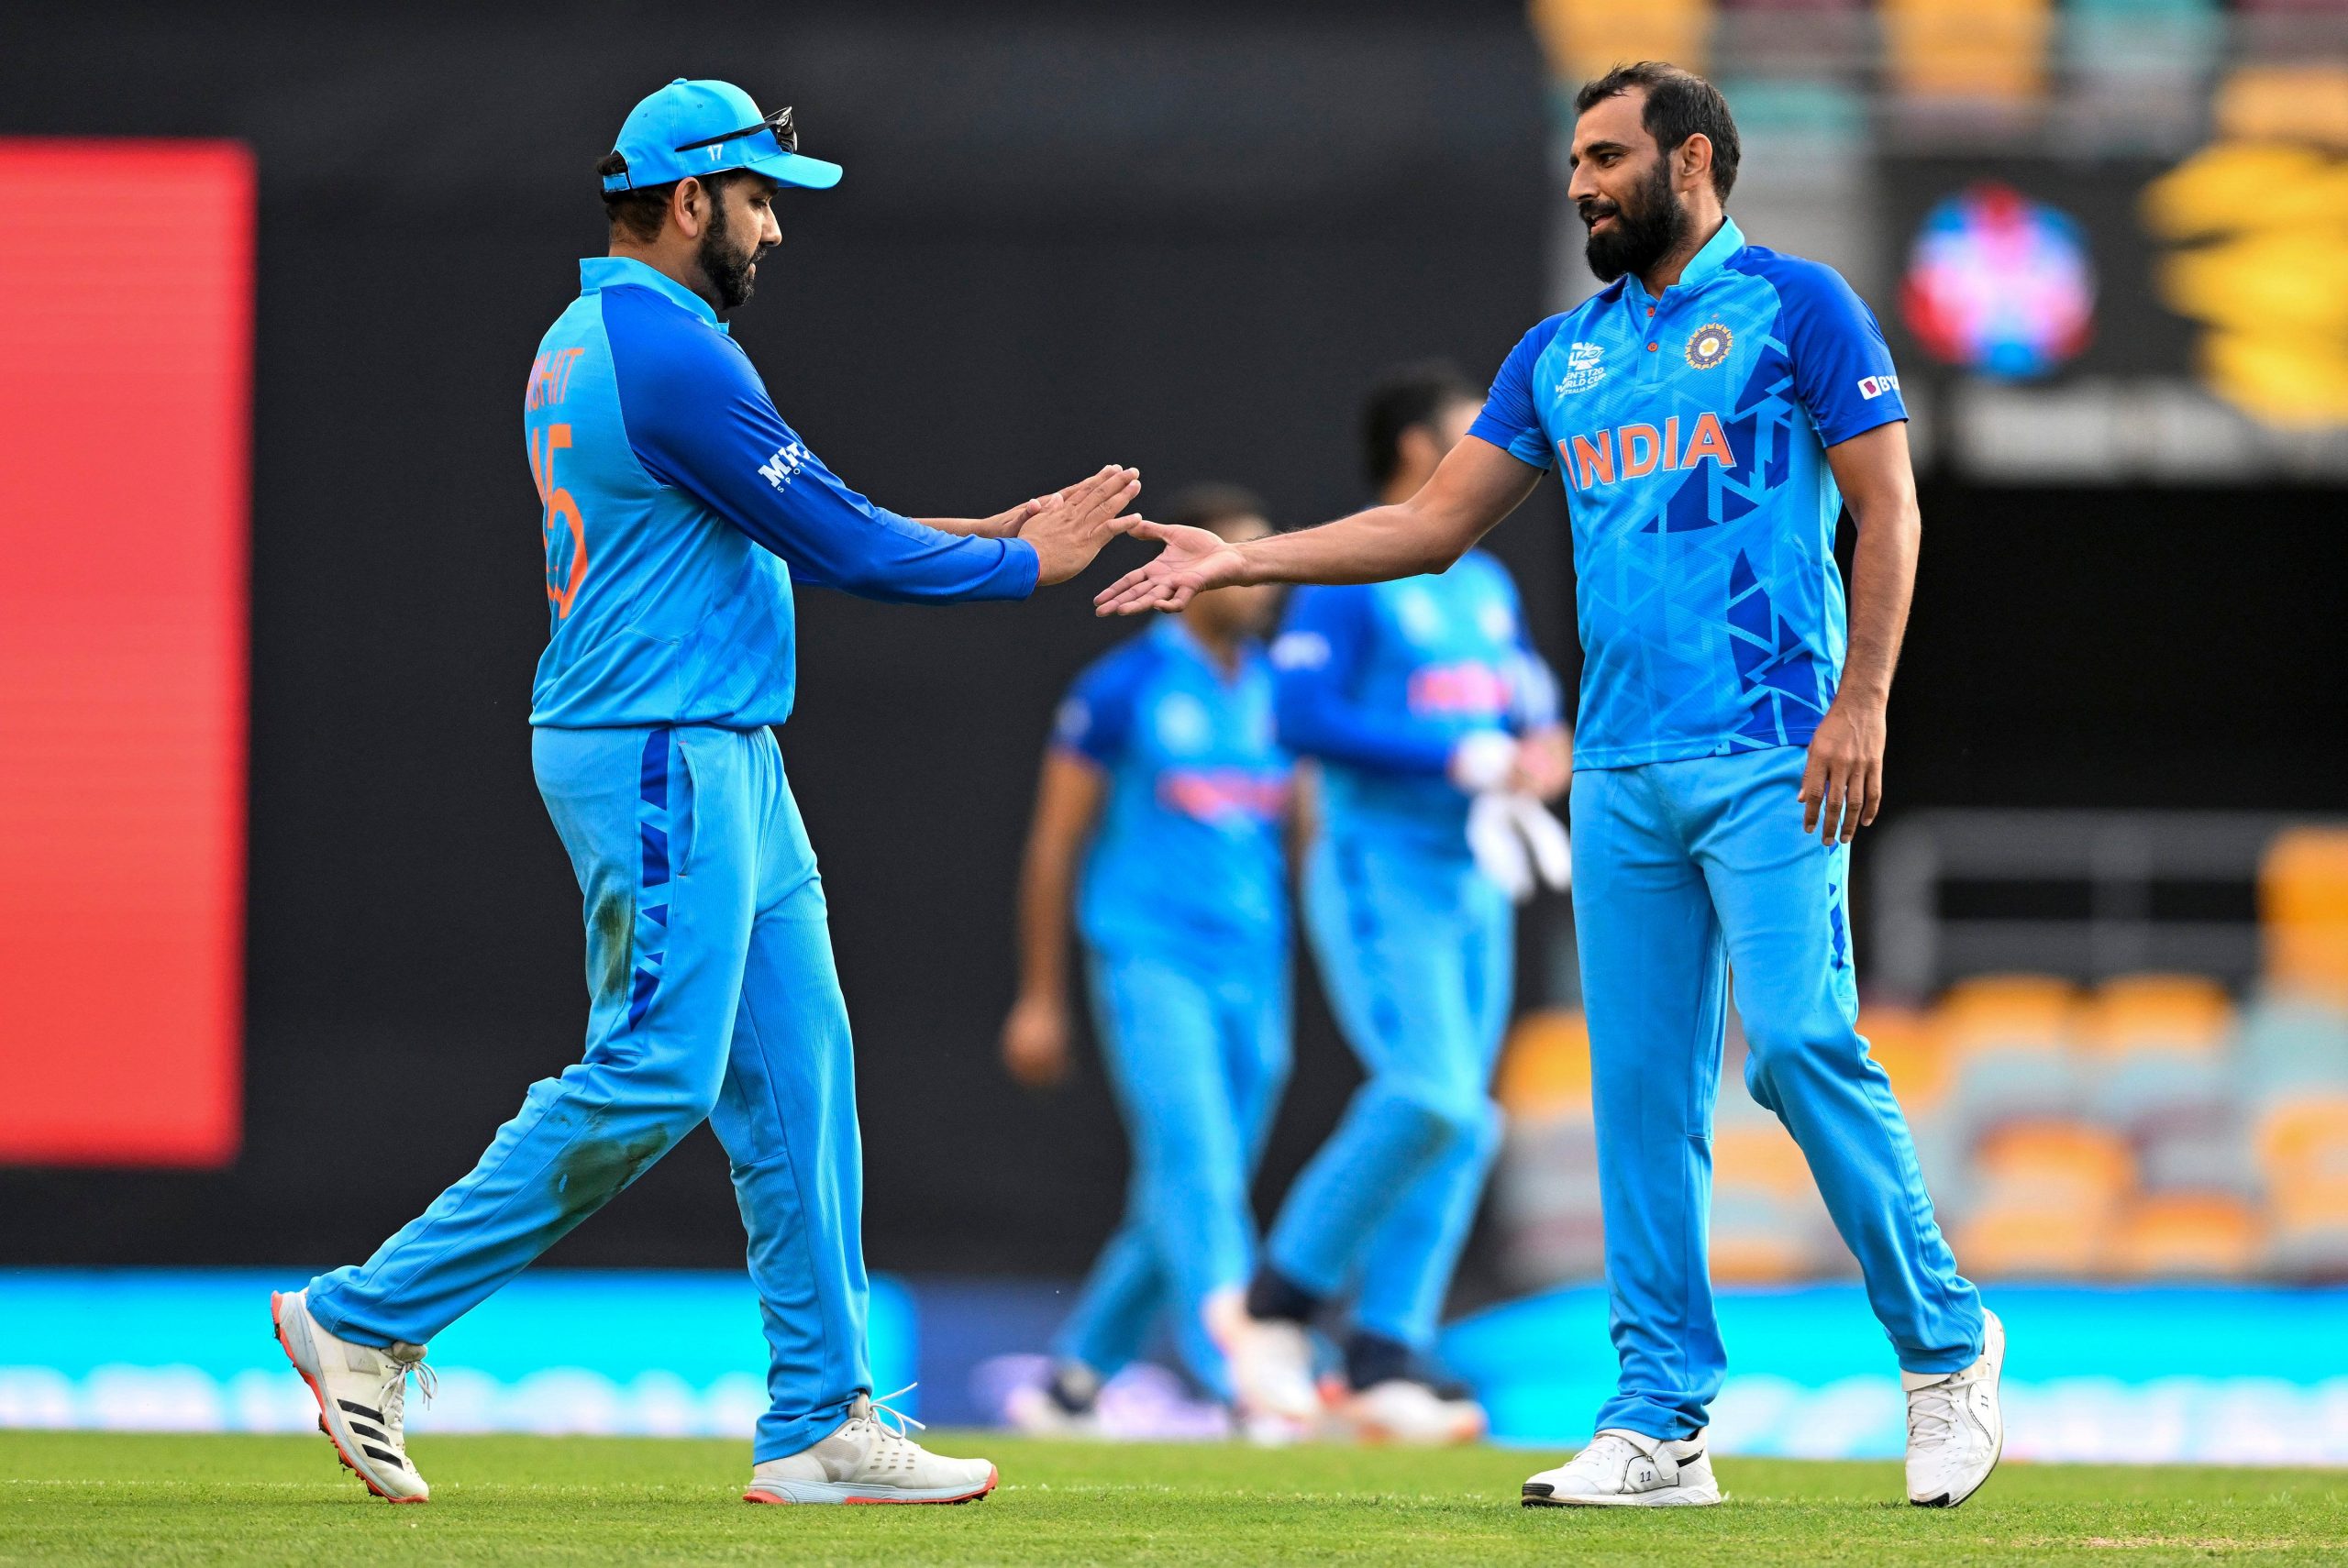 Mohammed Shami in, Harshal Patel out: Who bowls in death for India, vs Pakistan in T20 World Cup 2022 tie?